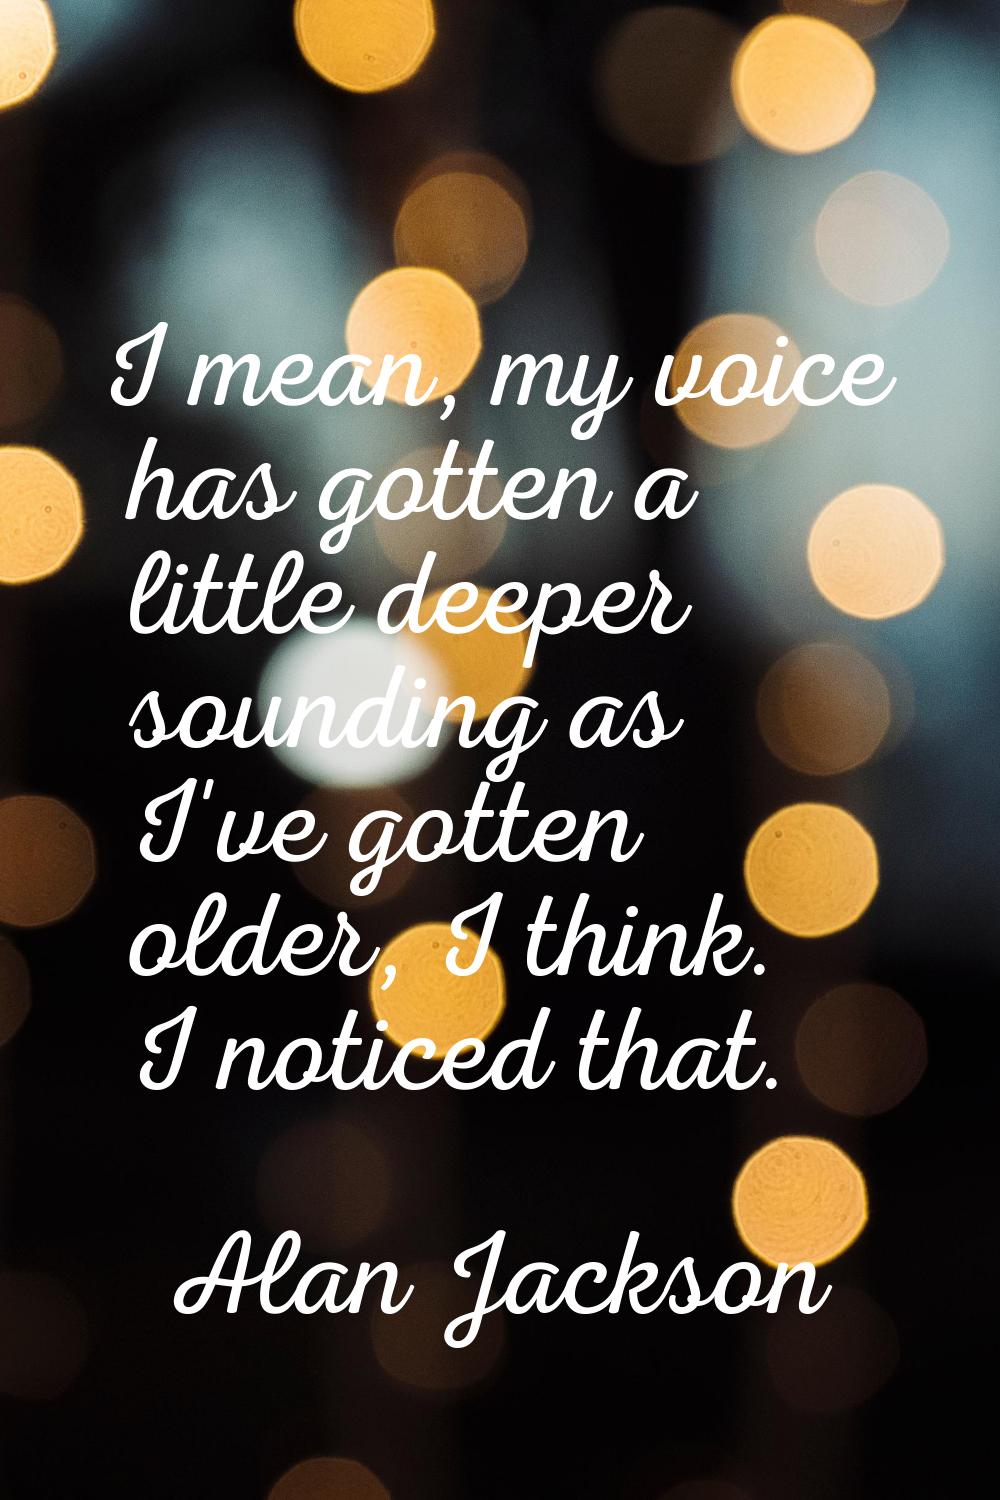 I mean, my voice has gotten a little deeper sounding as I've gotten older, I think. I noticed that.